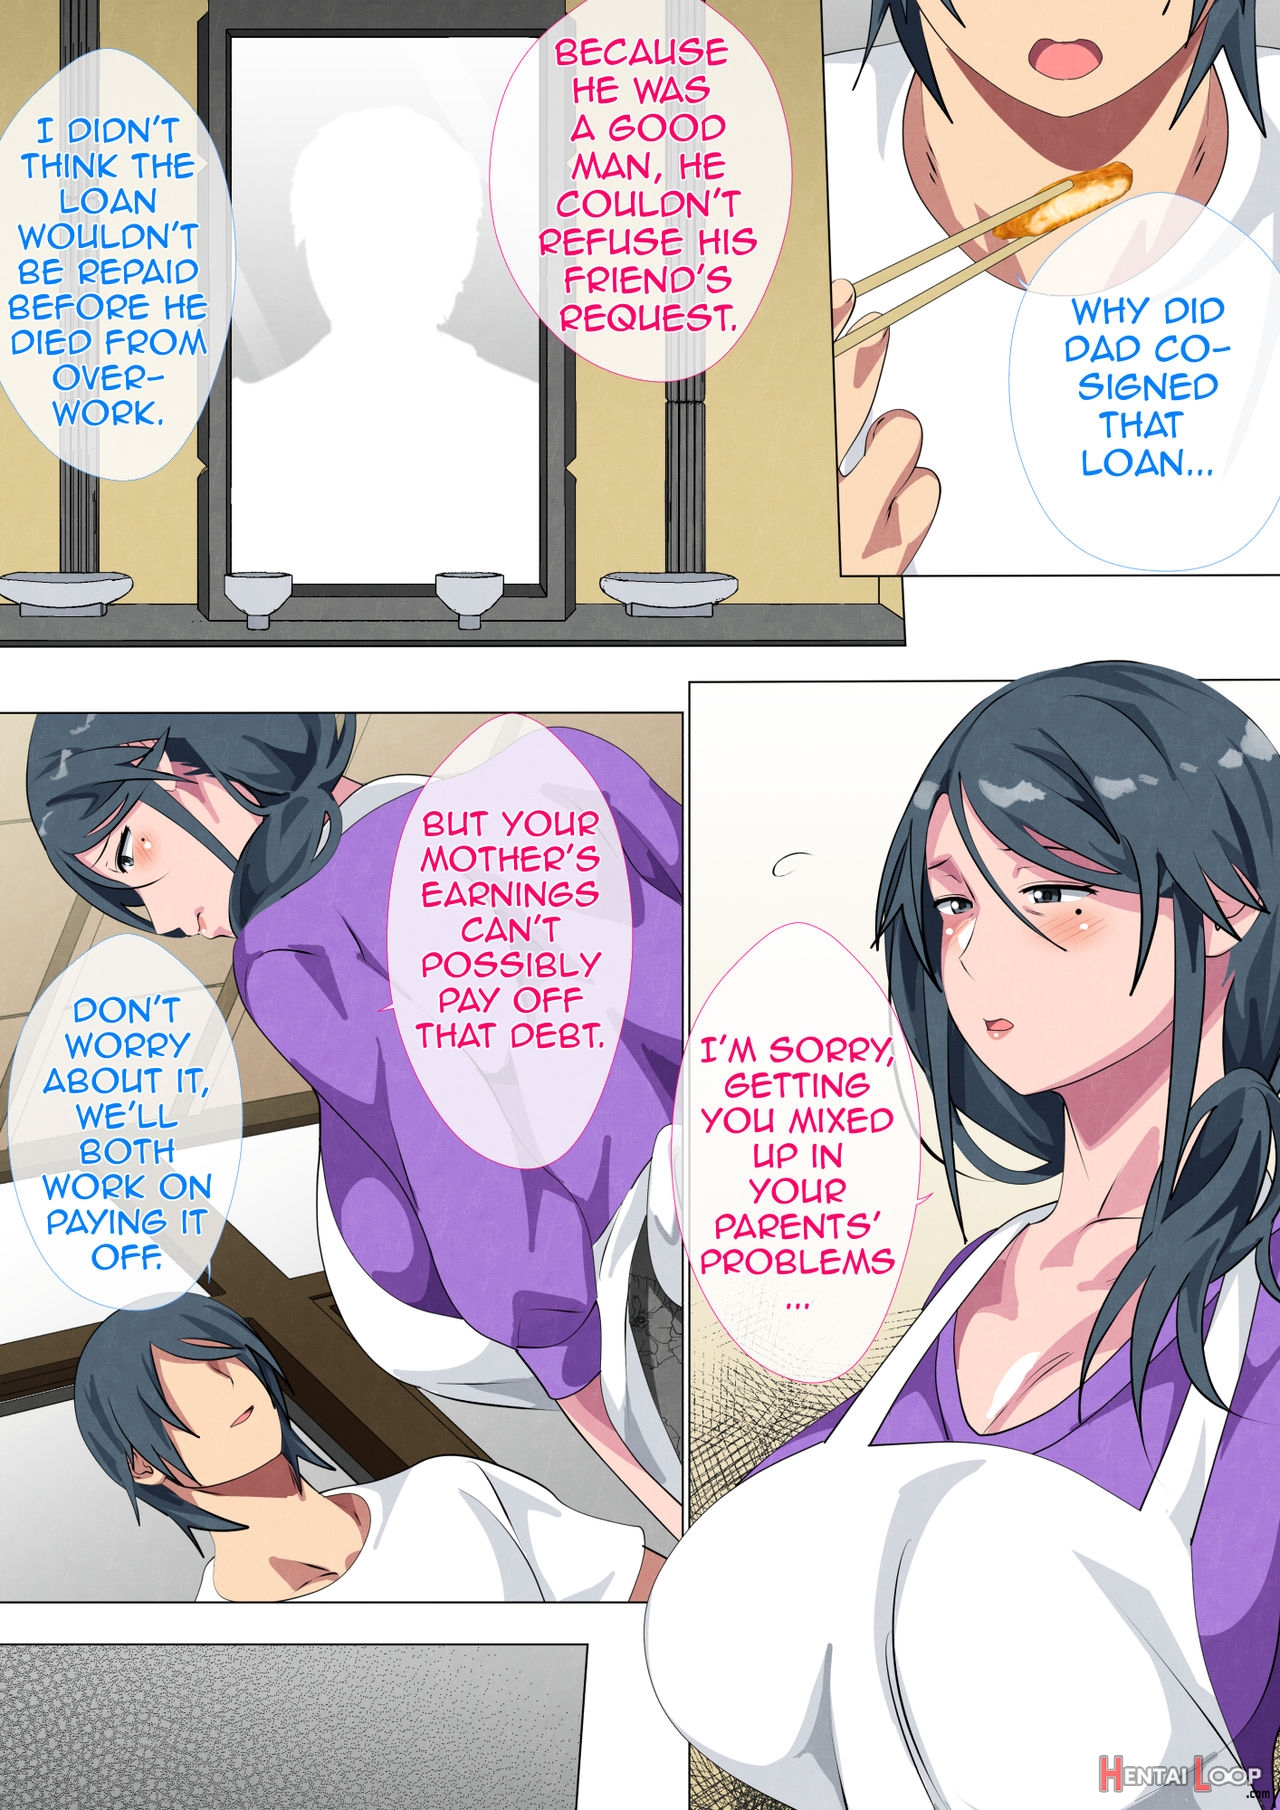 Widowed Mother Sayoko ~record Of A Copulation Of A Mother And Son Living In A Small Room~ page 4